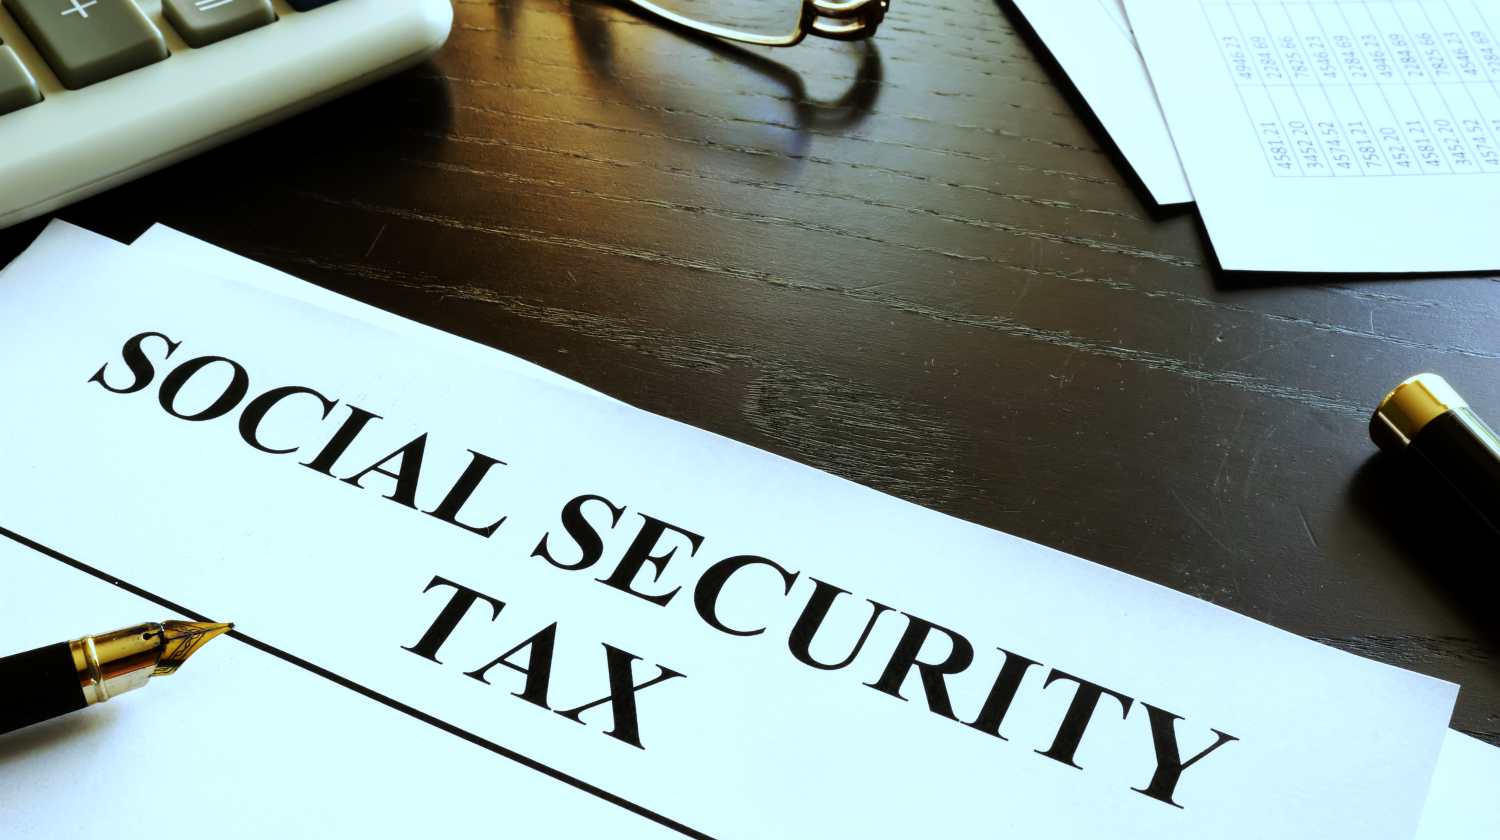 Social Security Tax: What Is It for and How Much Do I Pay ...